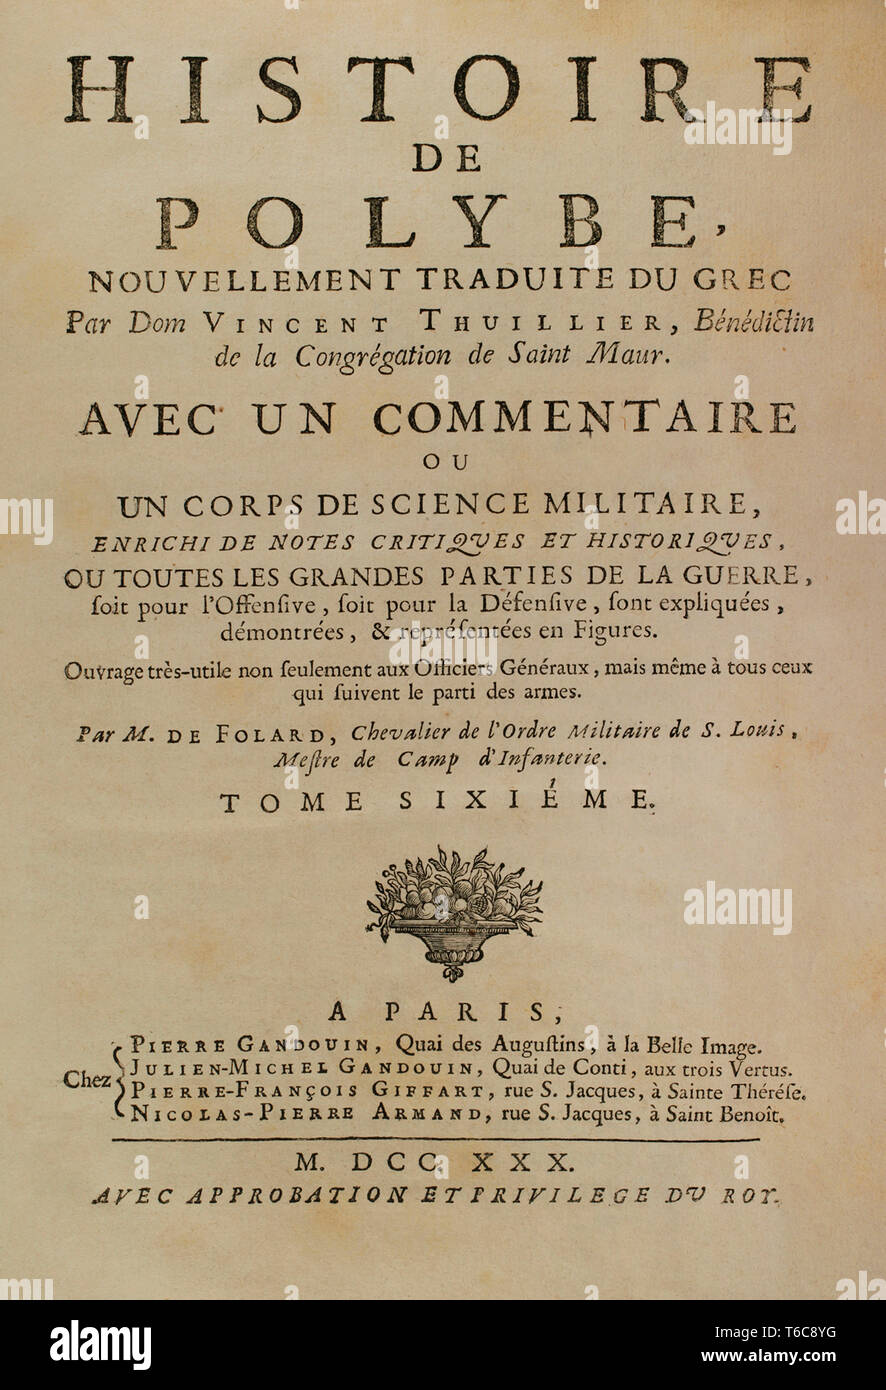 History by Polybius. Volume VI, 1730. French edition translated from Greek by Dom Vincent Thuillier. Comments of Military Science enriched with critical and historical notes by M. De Folard. Paris, chez Pierre Gandouin, Julien-Michel Gandouin, Pierre-Francois Giffart and Nicolas-Pierre Armand. Stock Photo